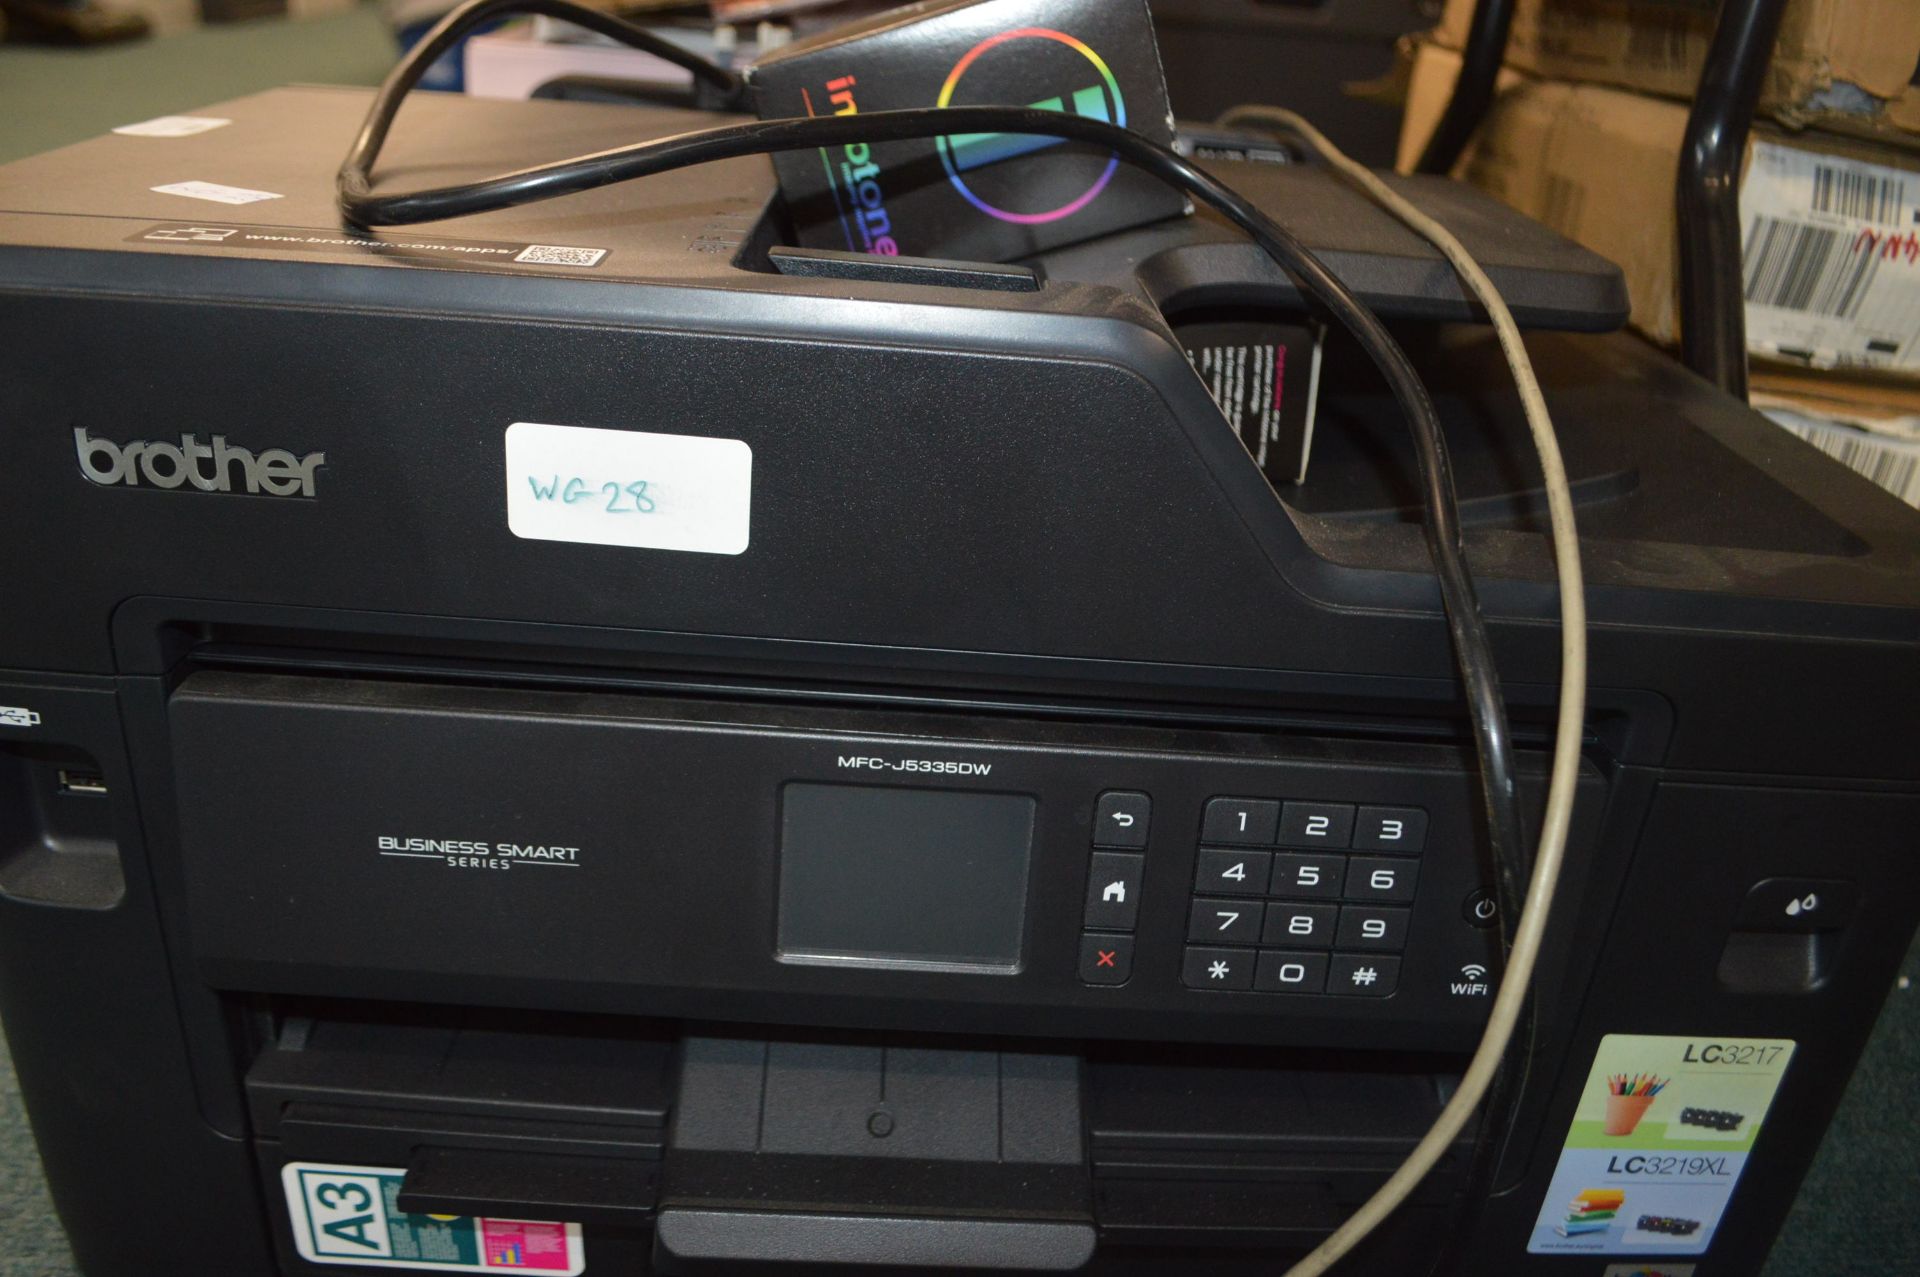 *Brother Business Smart LC3217 Printer - Image 2 of 2